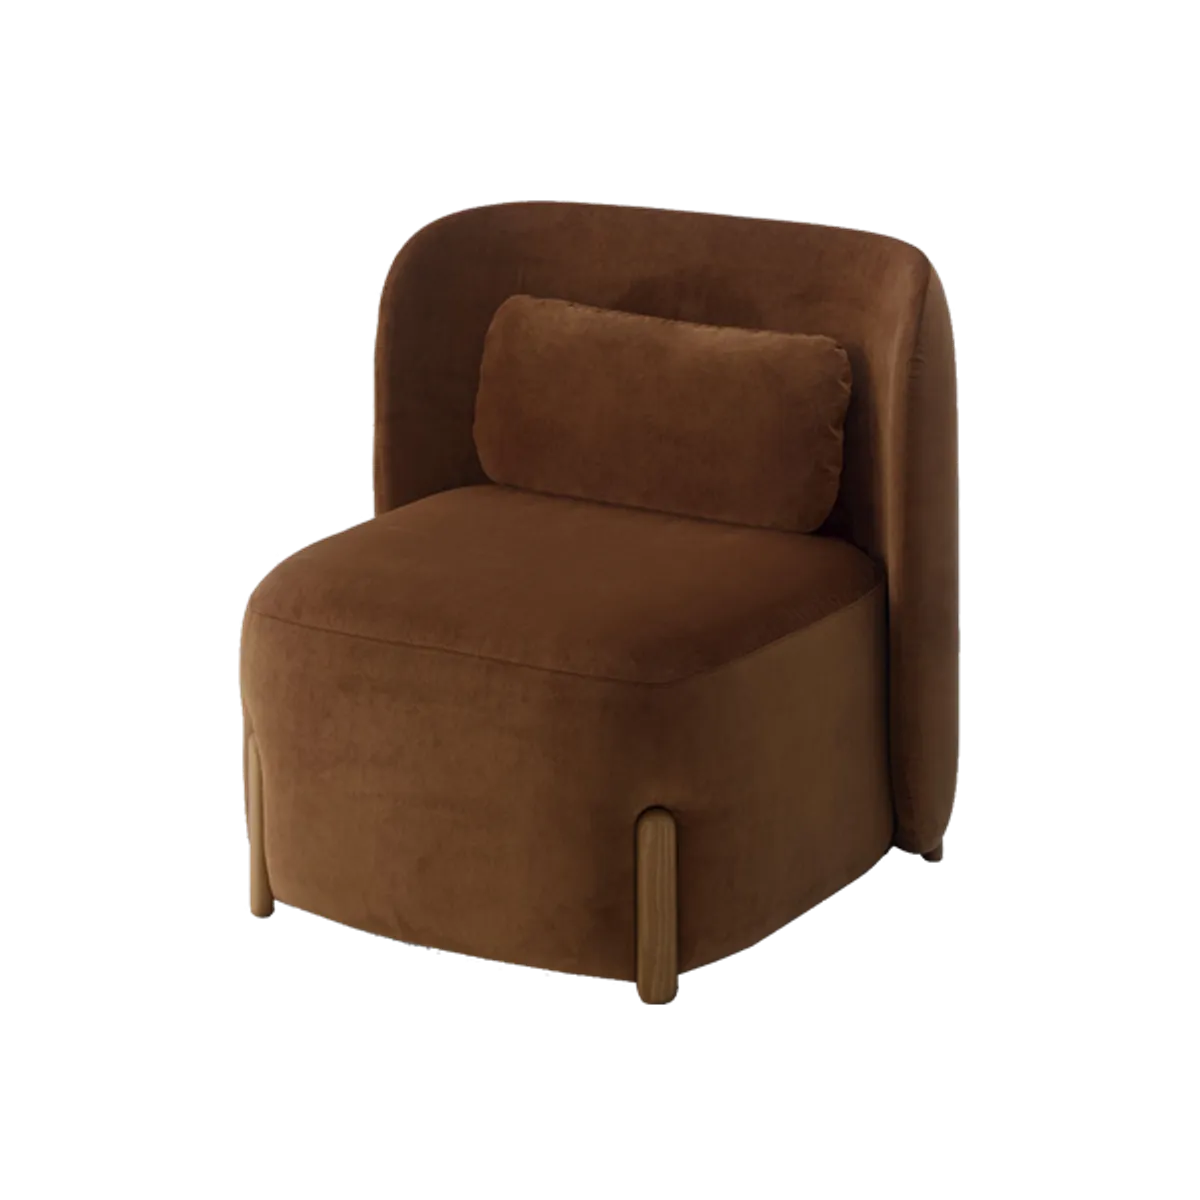 Hyppo Lounge Chair Inside Out Contracts